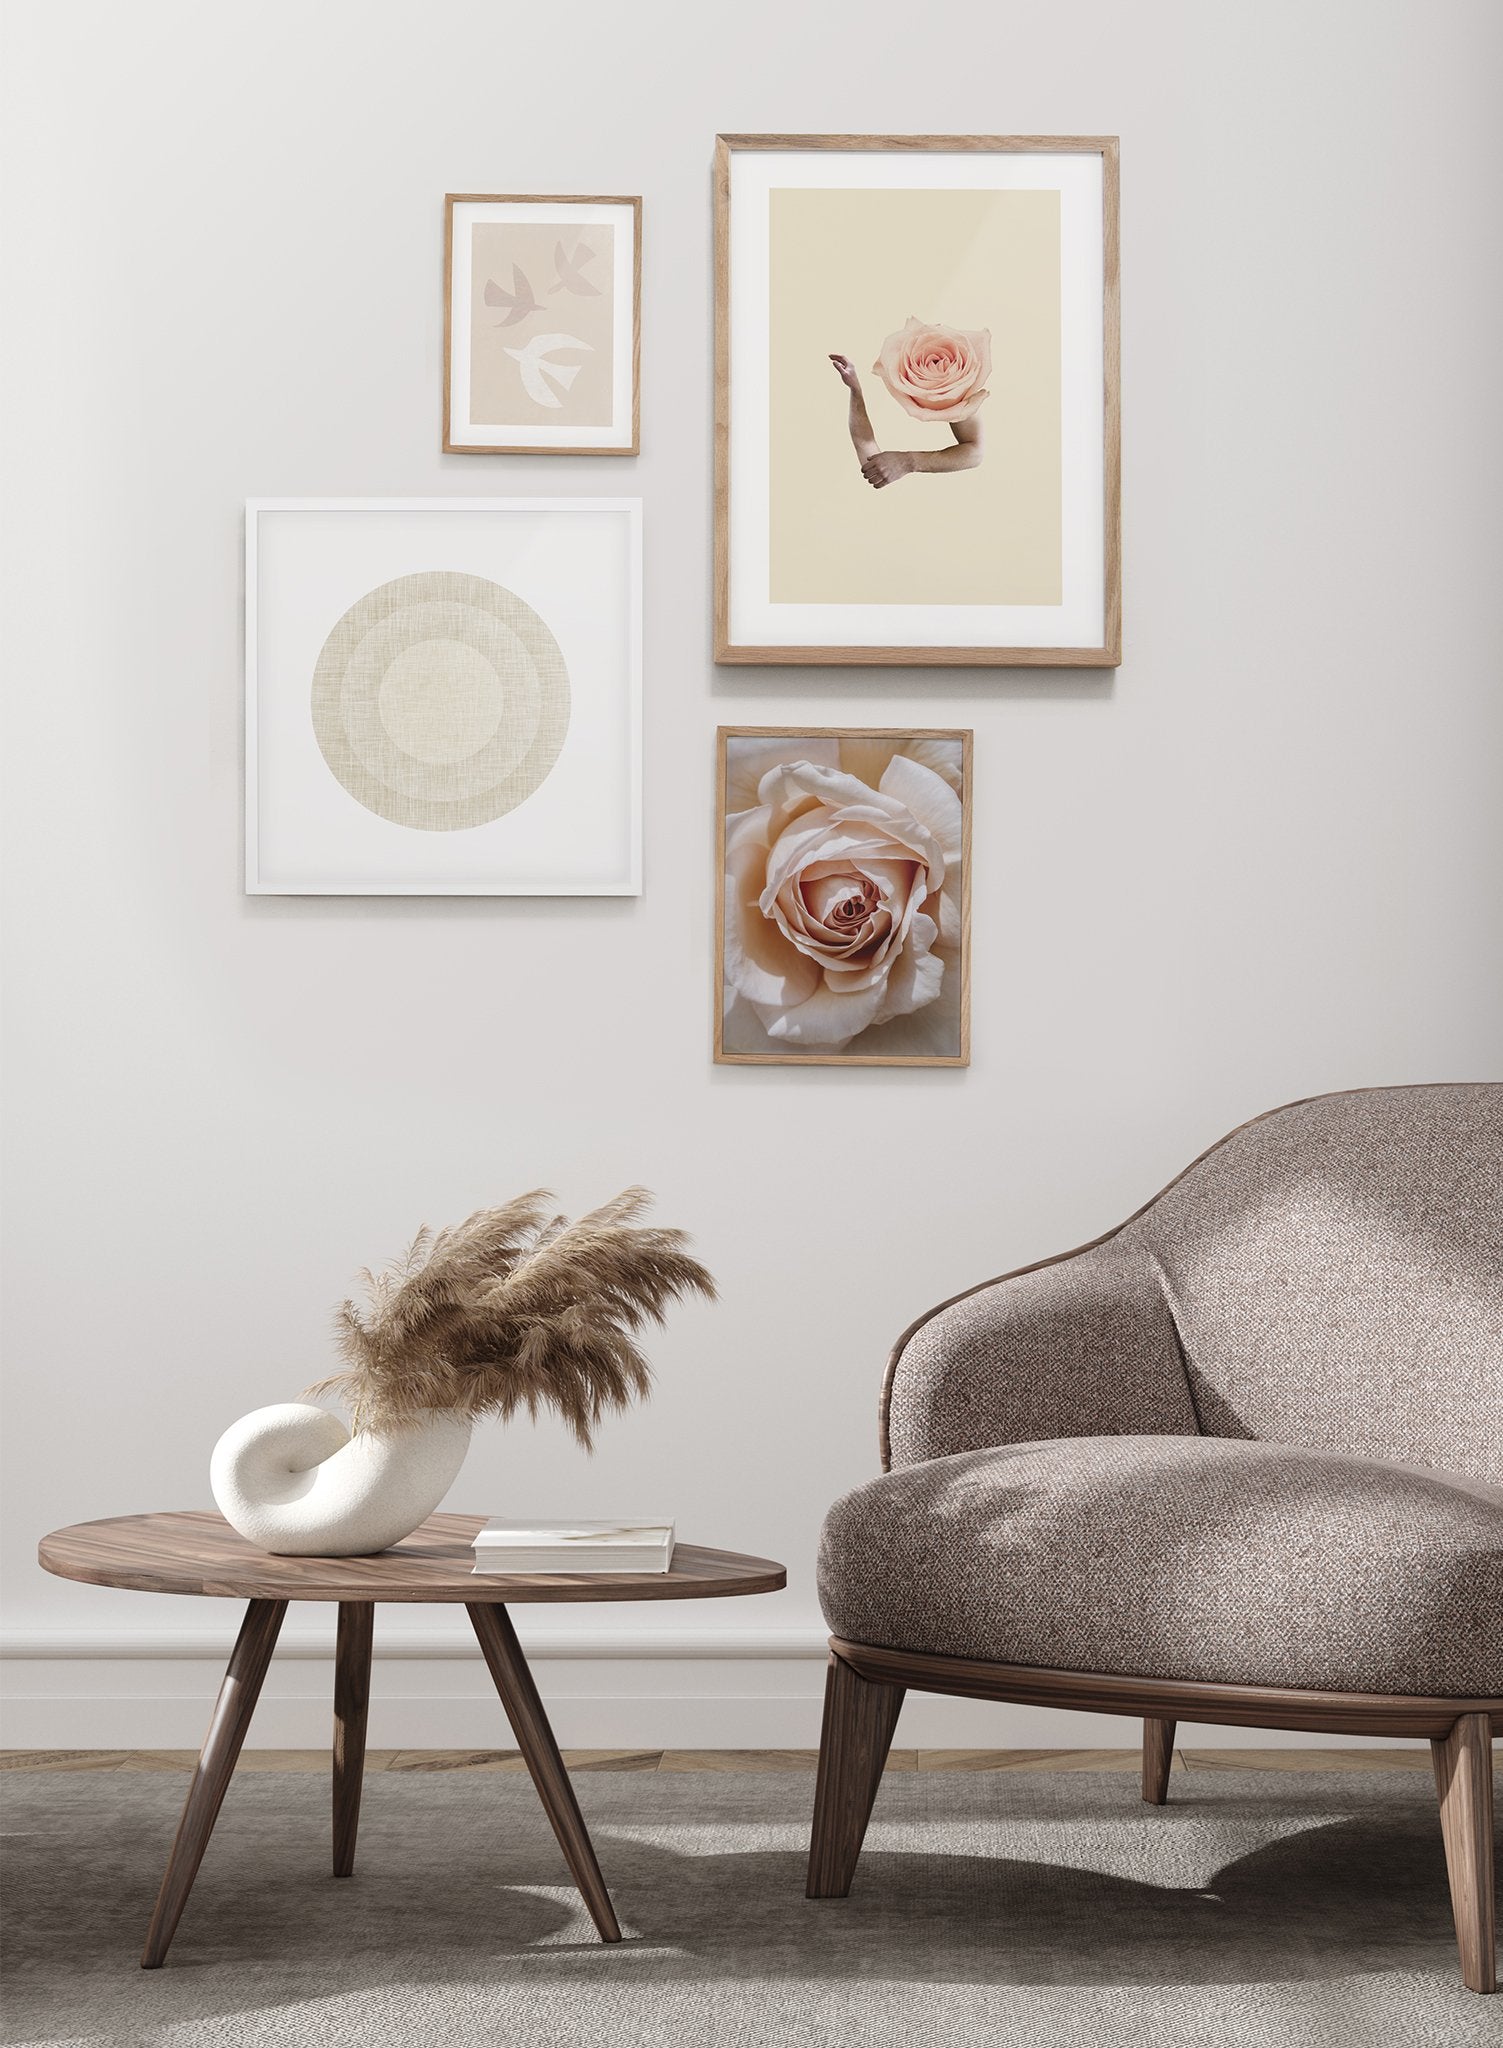 "Open Arms" is a minimalist beige and light pink collage poster by Opposite Wall of cutout arms and a baby pink rose layered over a beige background.